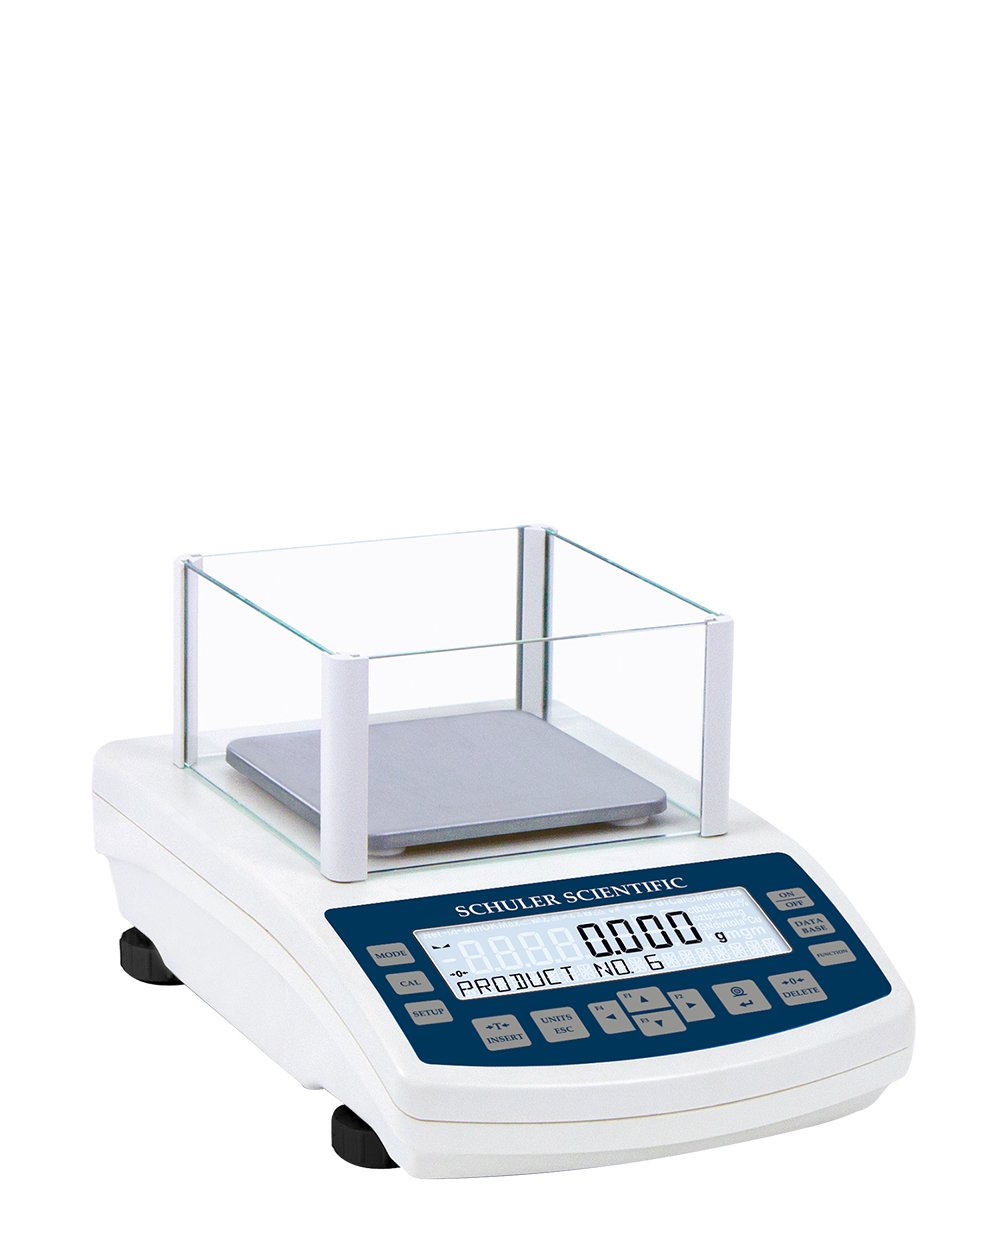 SCHULER SCIENTIFIC | NTEP Certified A-Series SPS-1003 Scale | 1000g Capacity - 1mg Readability - 1